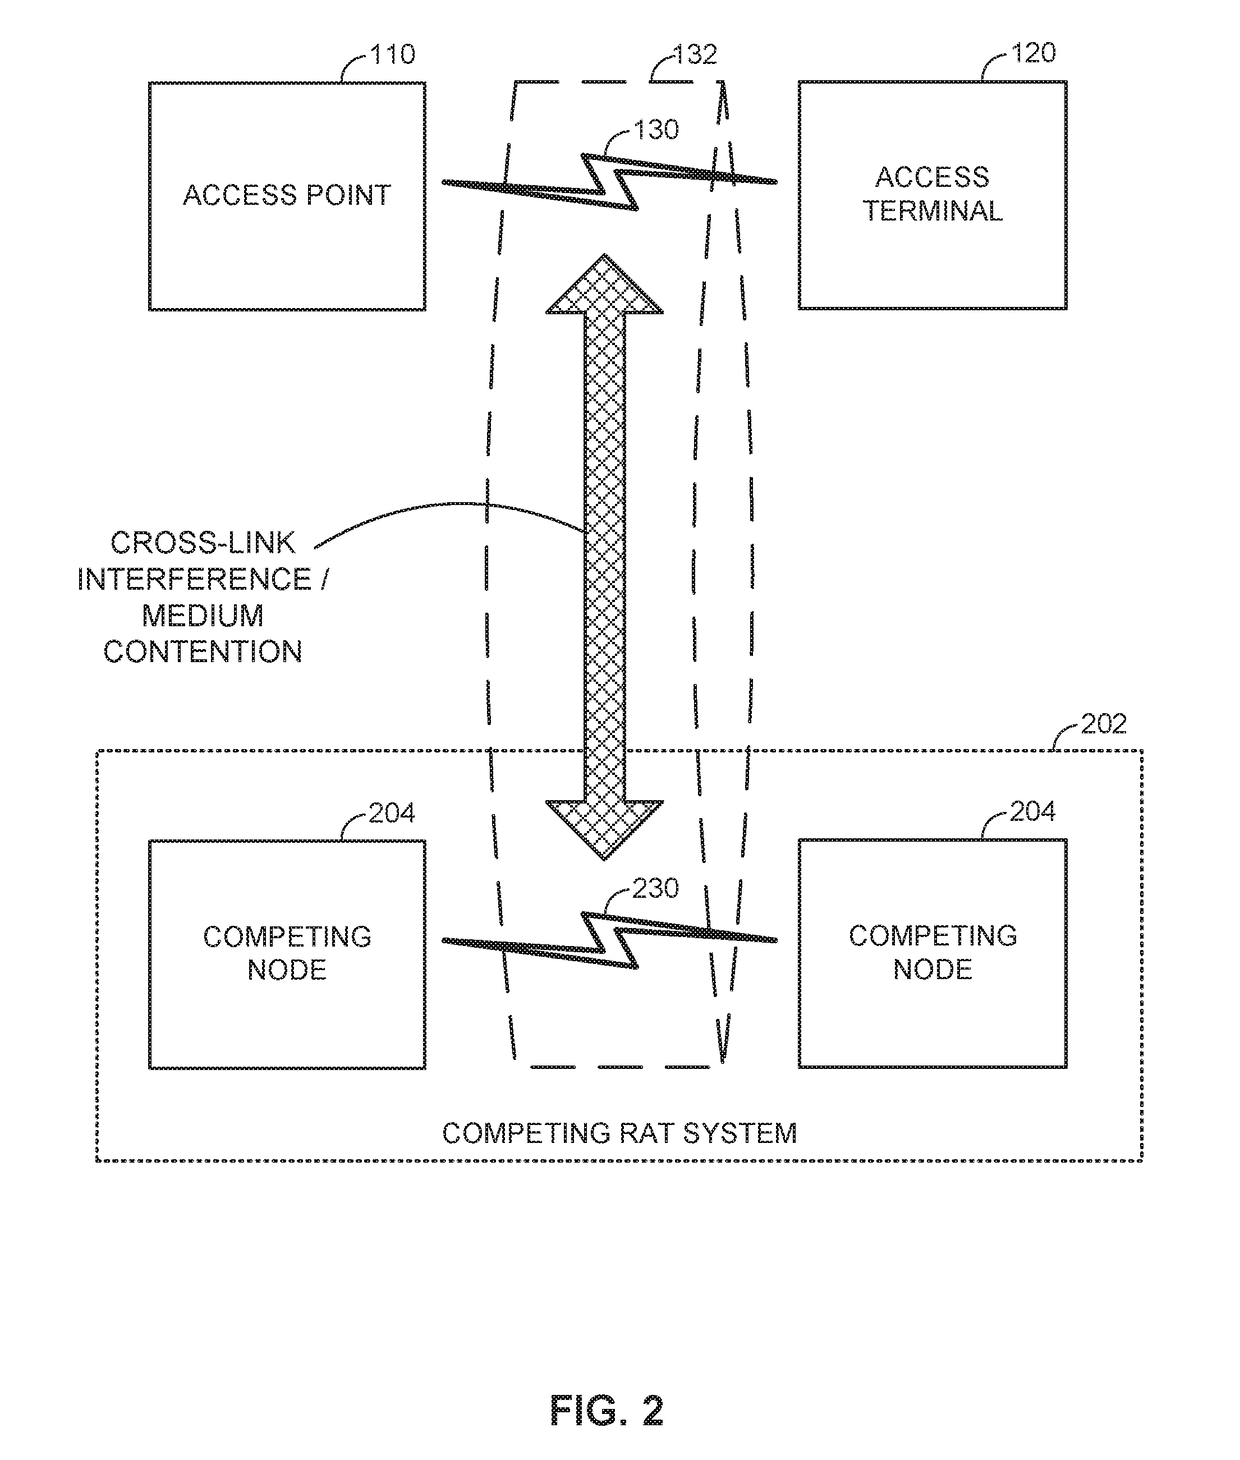 Control signaling in a shared communication medium